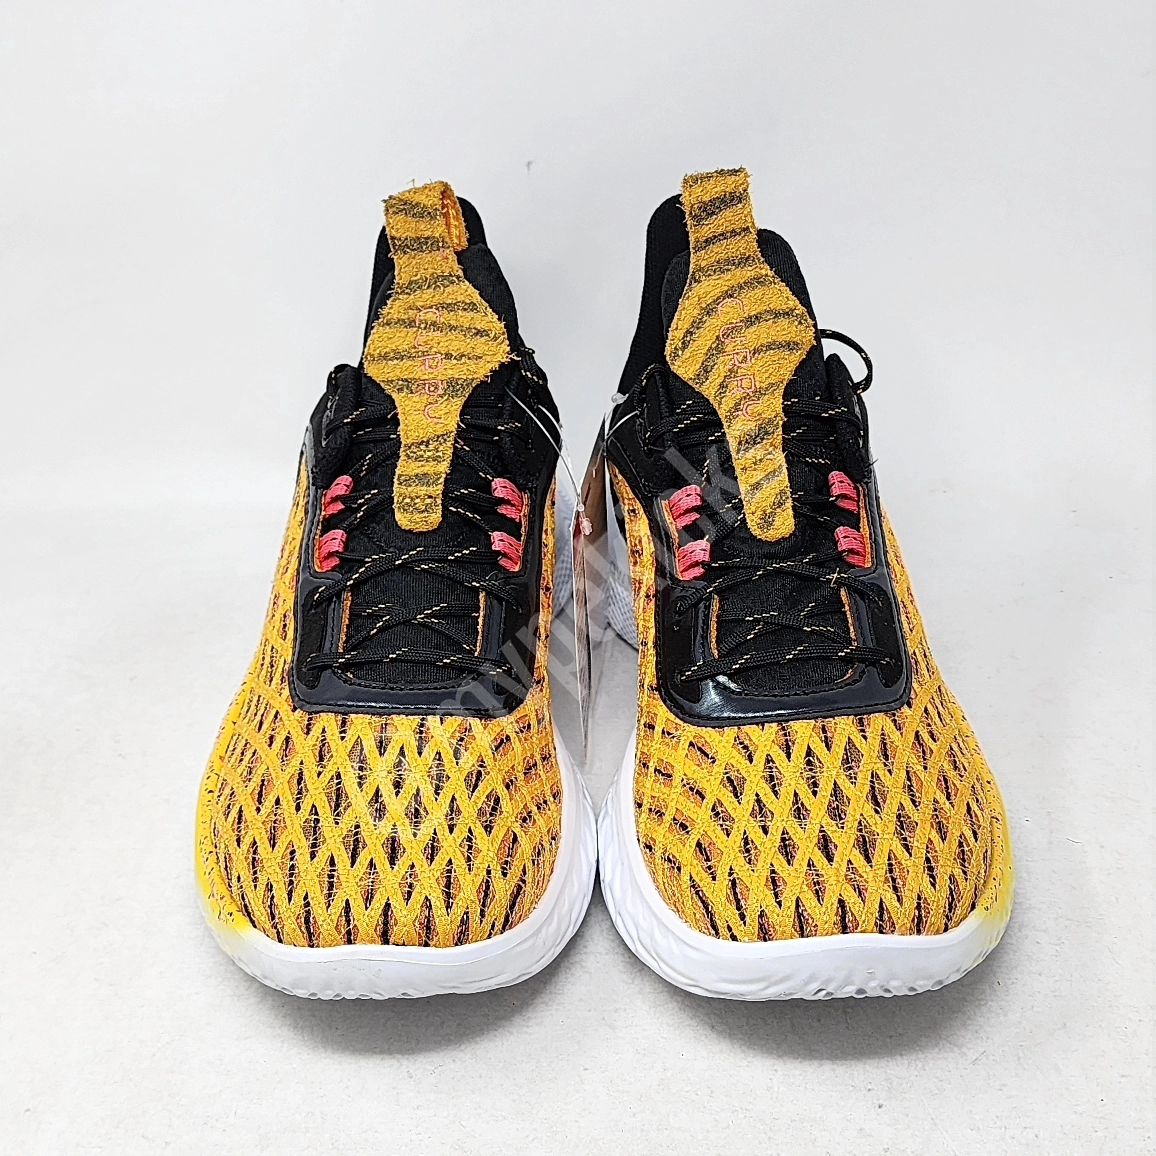 Under Armour Curry 9 - Stephen Curry Golden State Warriors PE